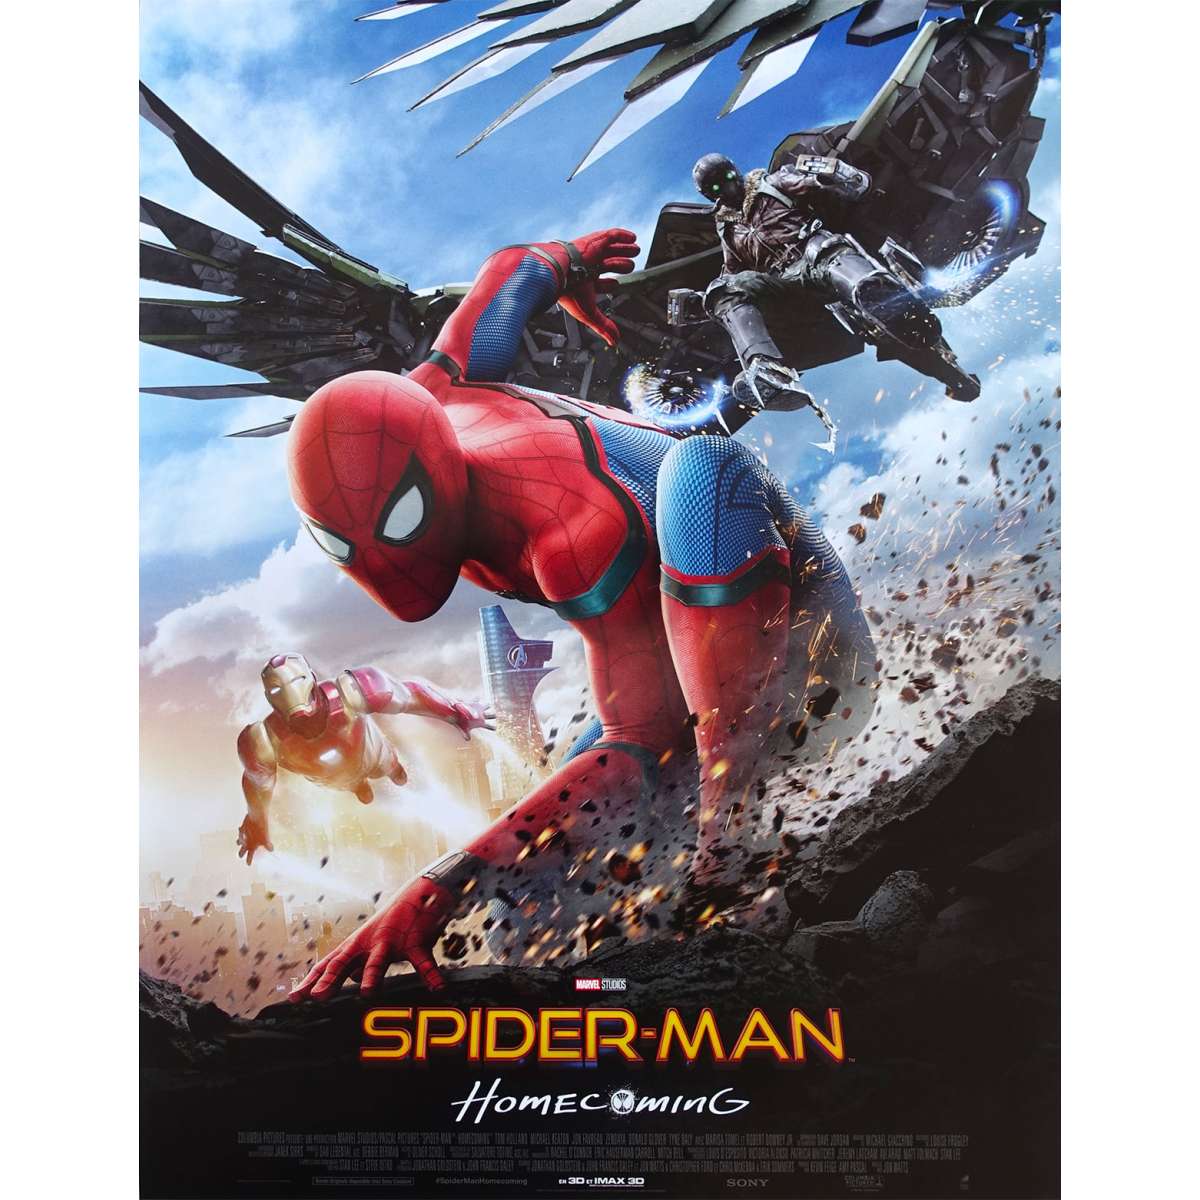 SPIDER-MAN HOMECOMING Movie Poster 15x21 in.